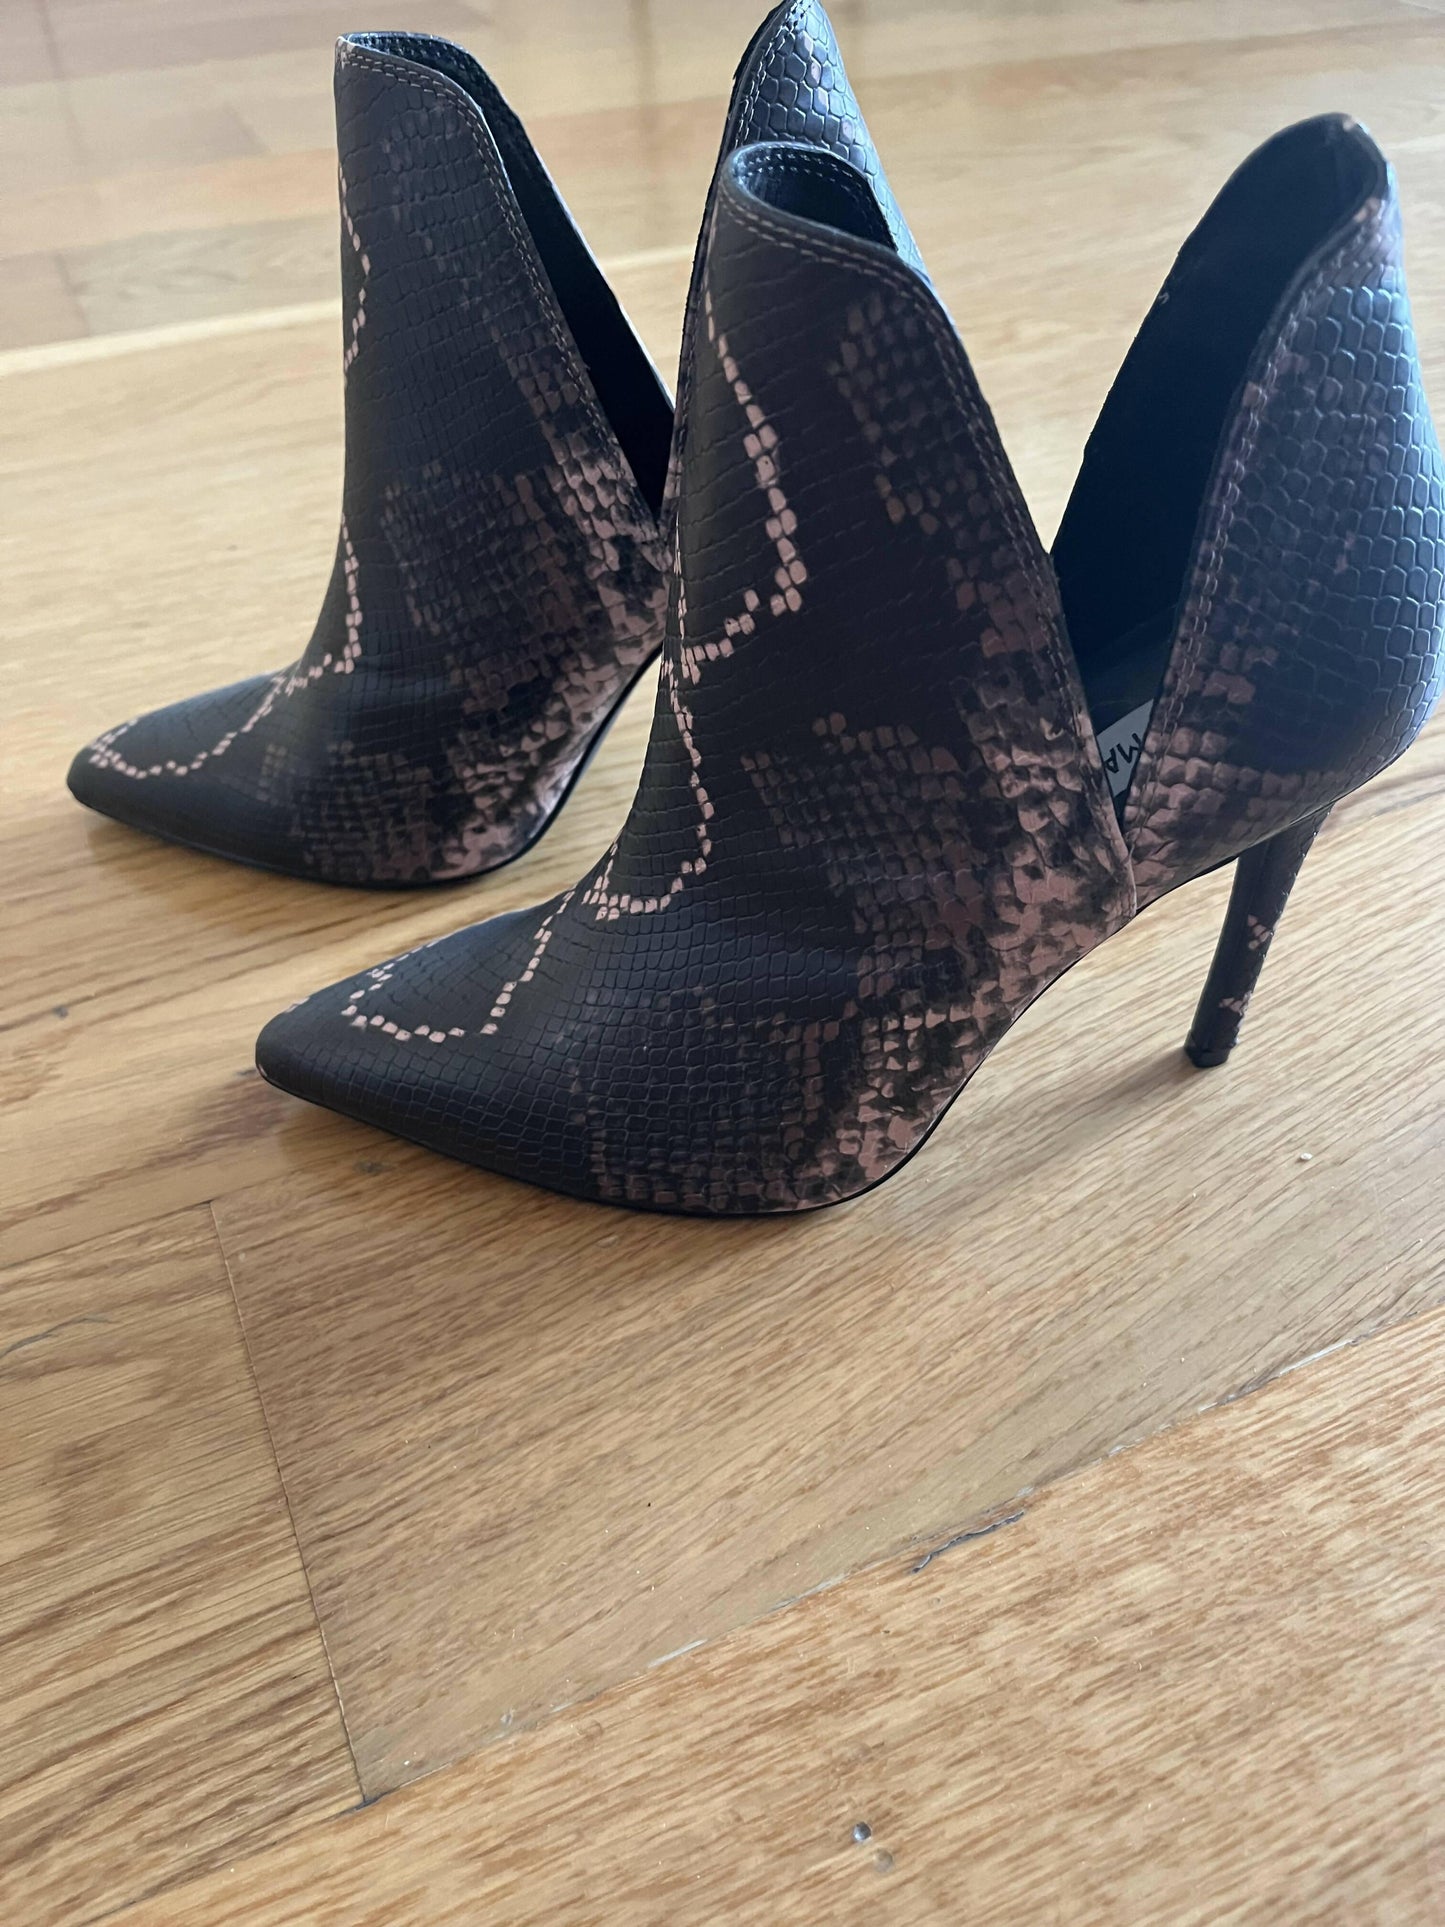 Analese Snake Print Boots - Endless